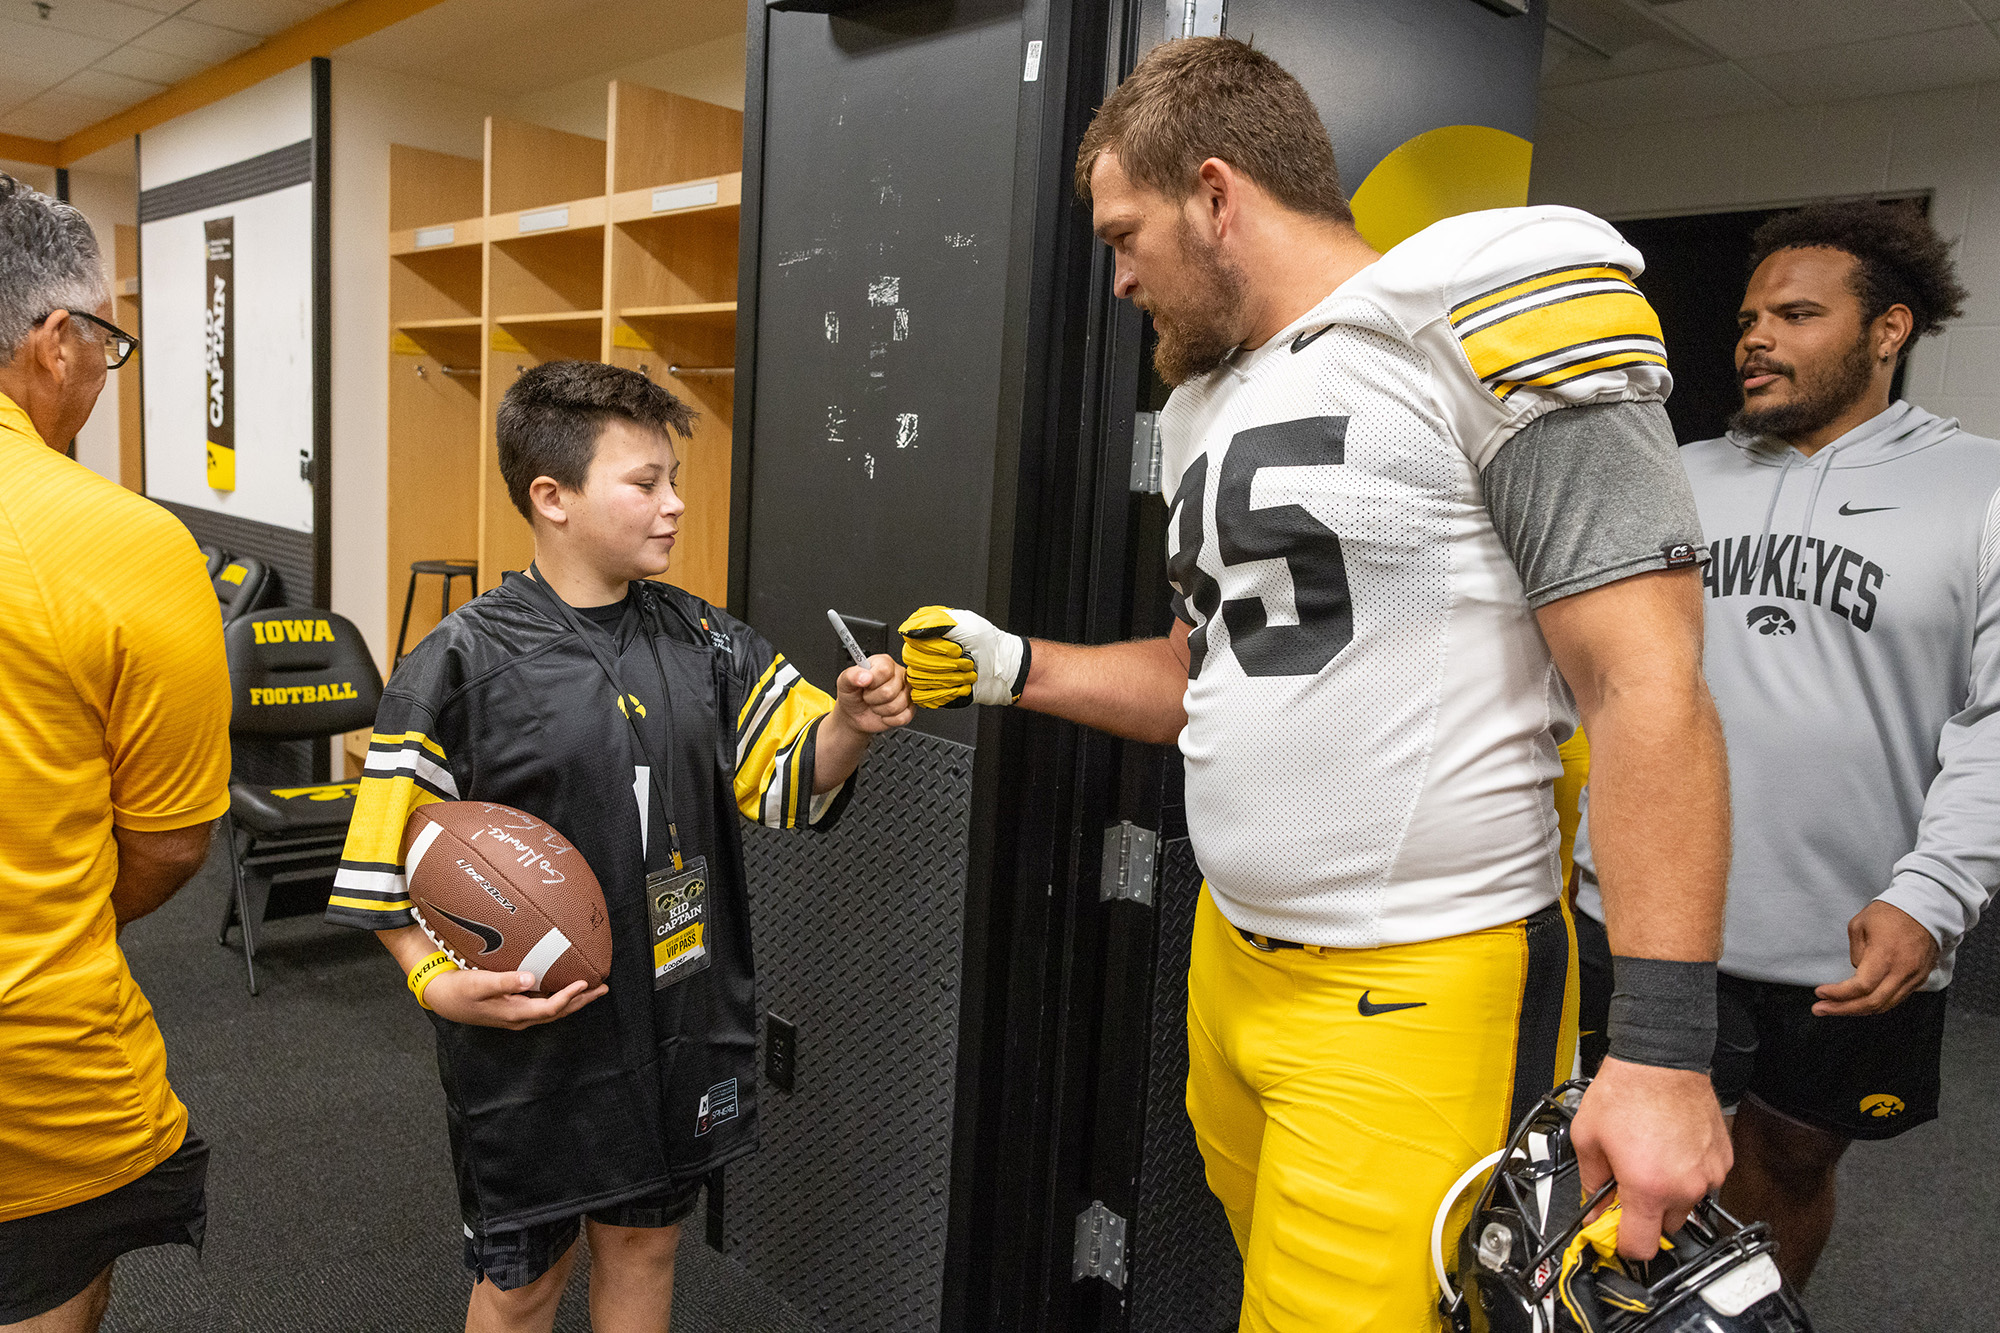 Kid Captain Cooper Estenson meeting an Iowa player at Kids Day at Kinnick